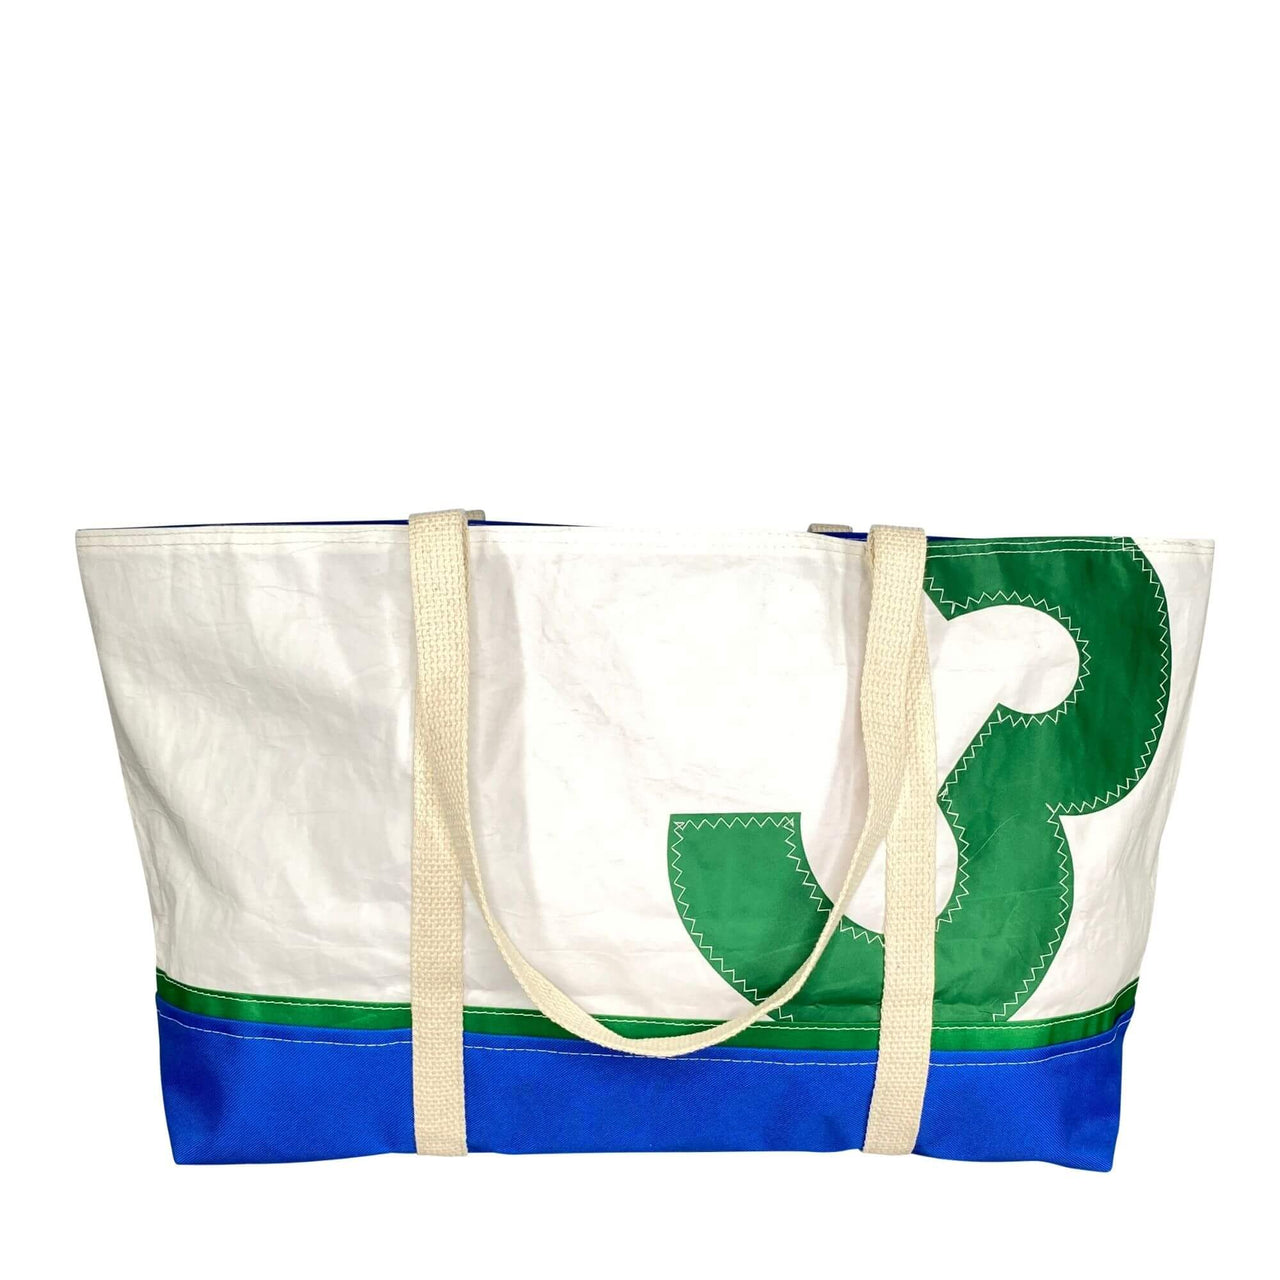 Plastic, Paper or Cotton: Which Shopping Bag is Best? - Sustainable Living